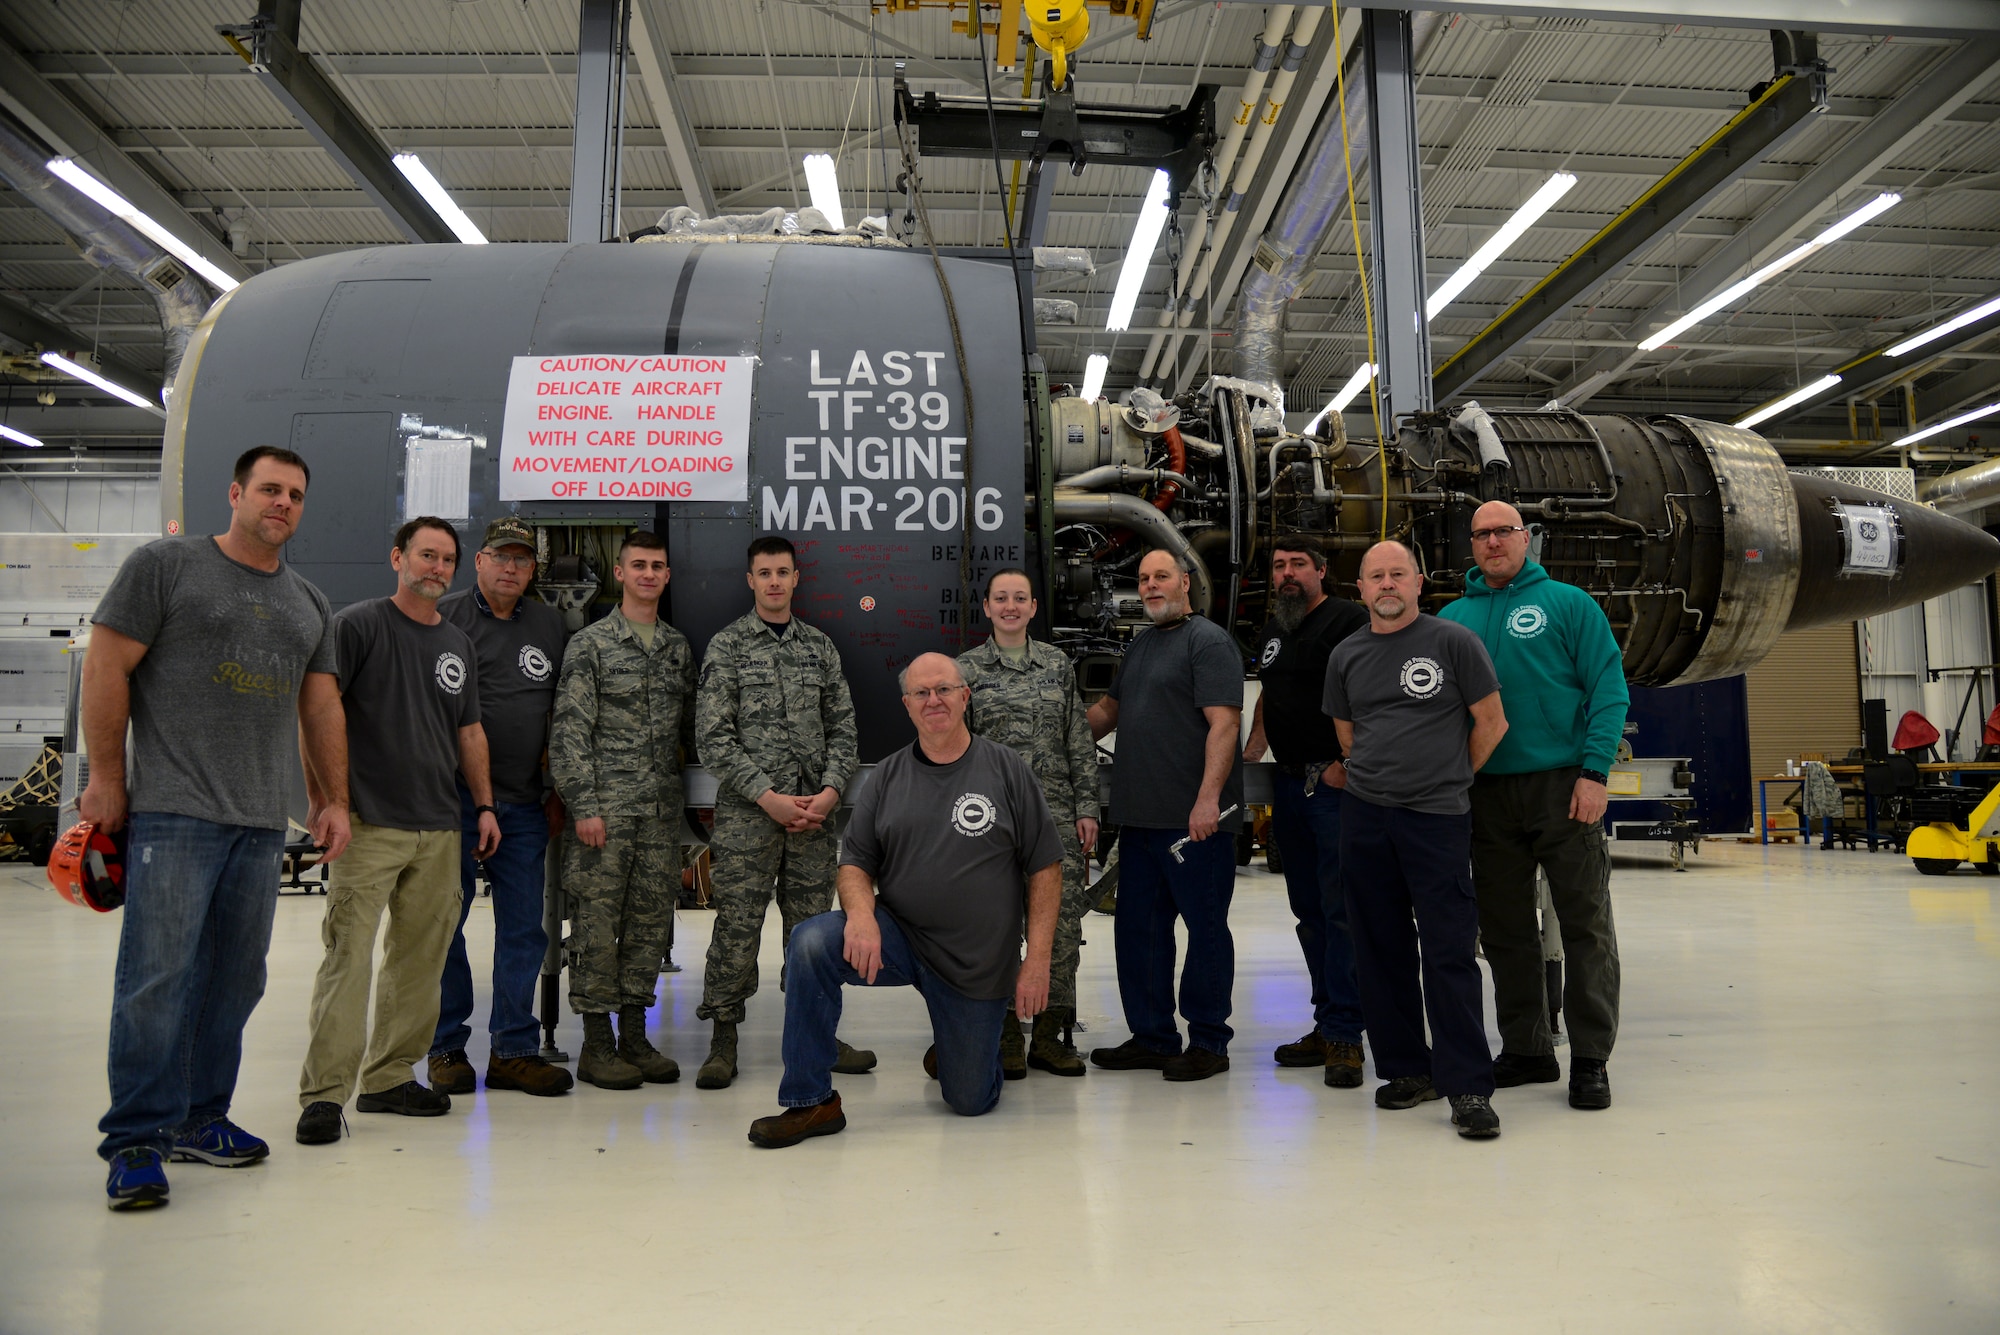 Members of the legacy 436th Maintenance Squadron Jet Engine Intermediate Level Maintenance Shop stand in front of the last General Electric TF-39 turbofan engine used and owned by the Air Force during a brief ceremony Feb. 16, 2018, at Dover Air Force Base, Del. The members of the shop bid farewell to the final TF-39 engine built at the shop and the last one owned by the Air Force. (U.S. Air Force photo by Staff Sgt. Aaron J. Jenne)